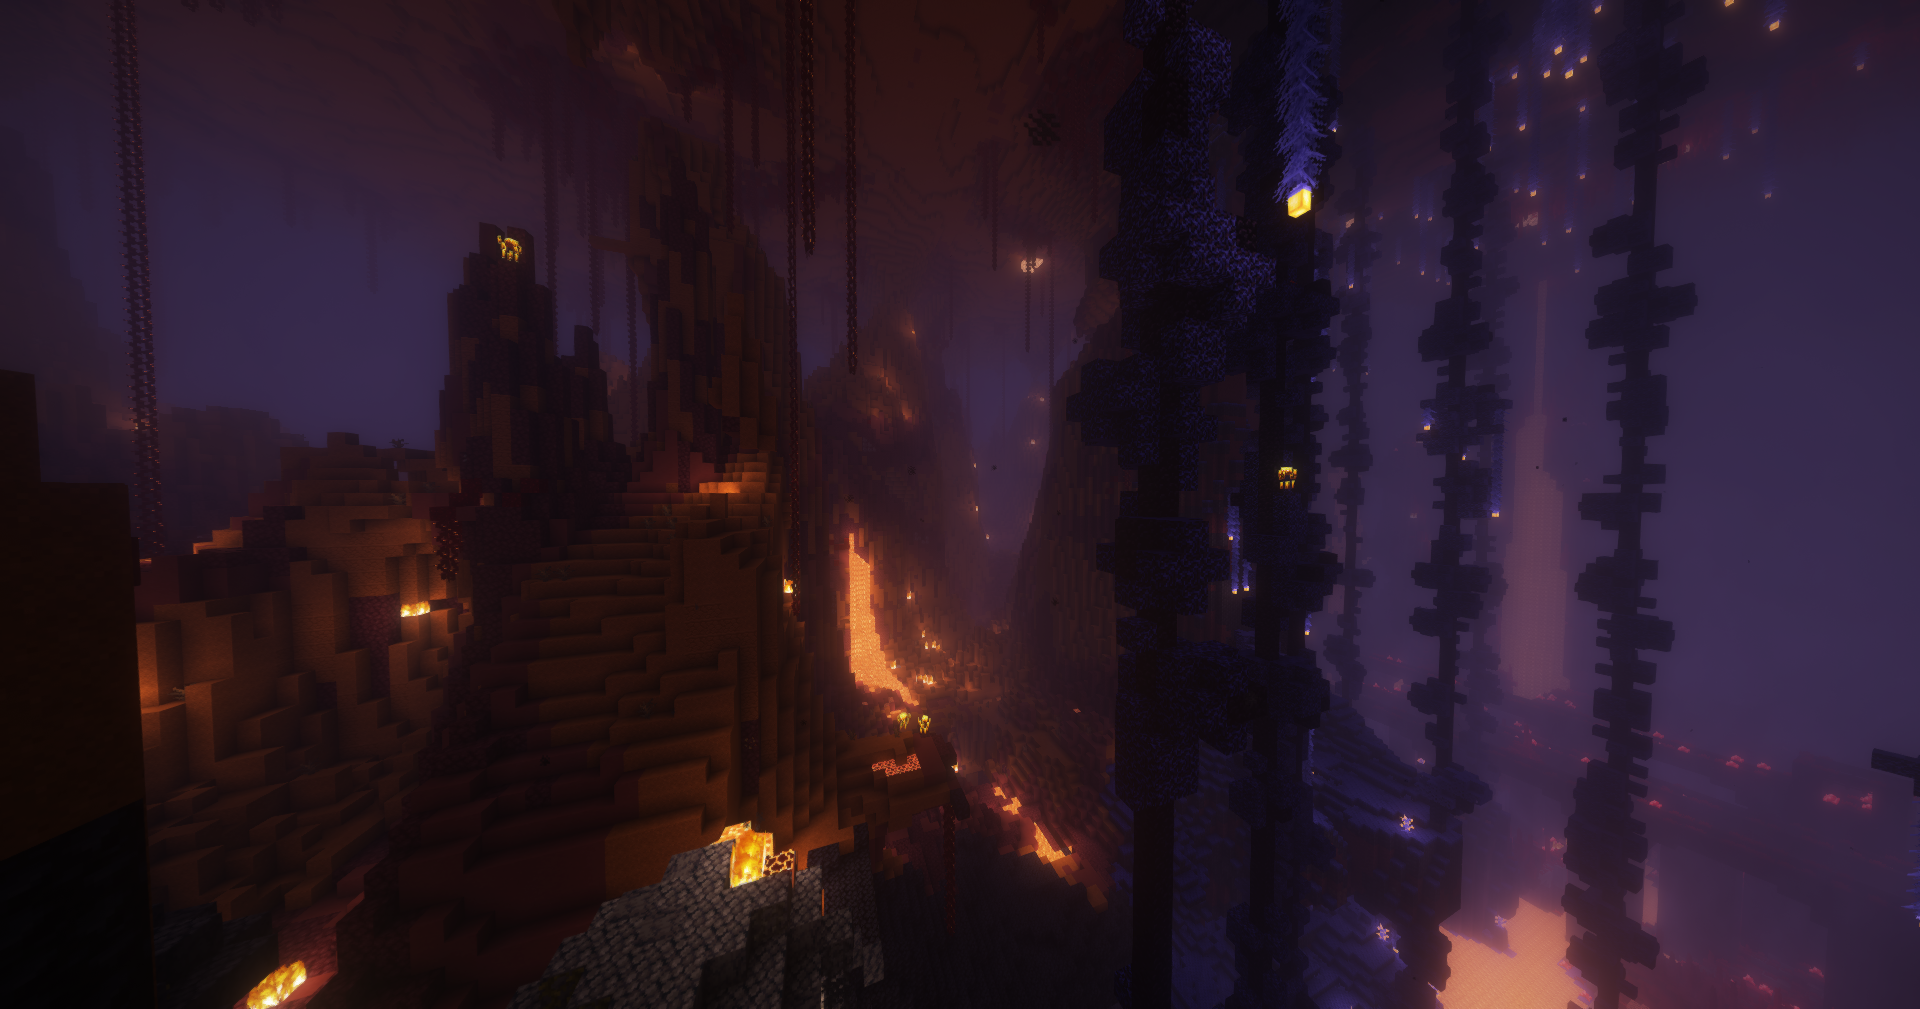 Nether 2